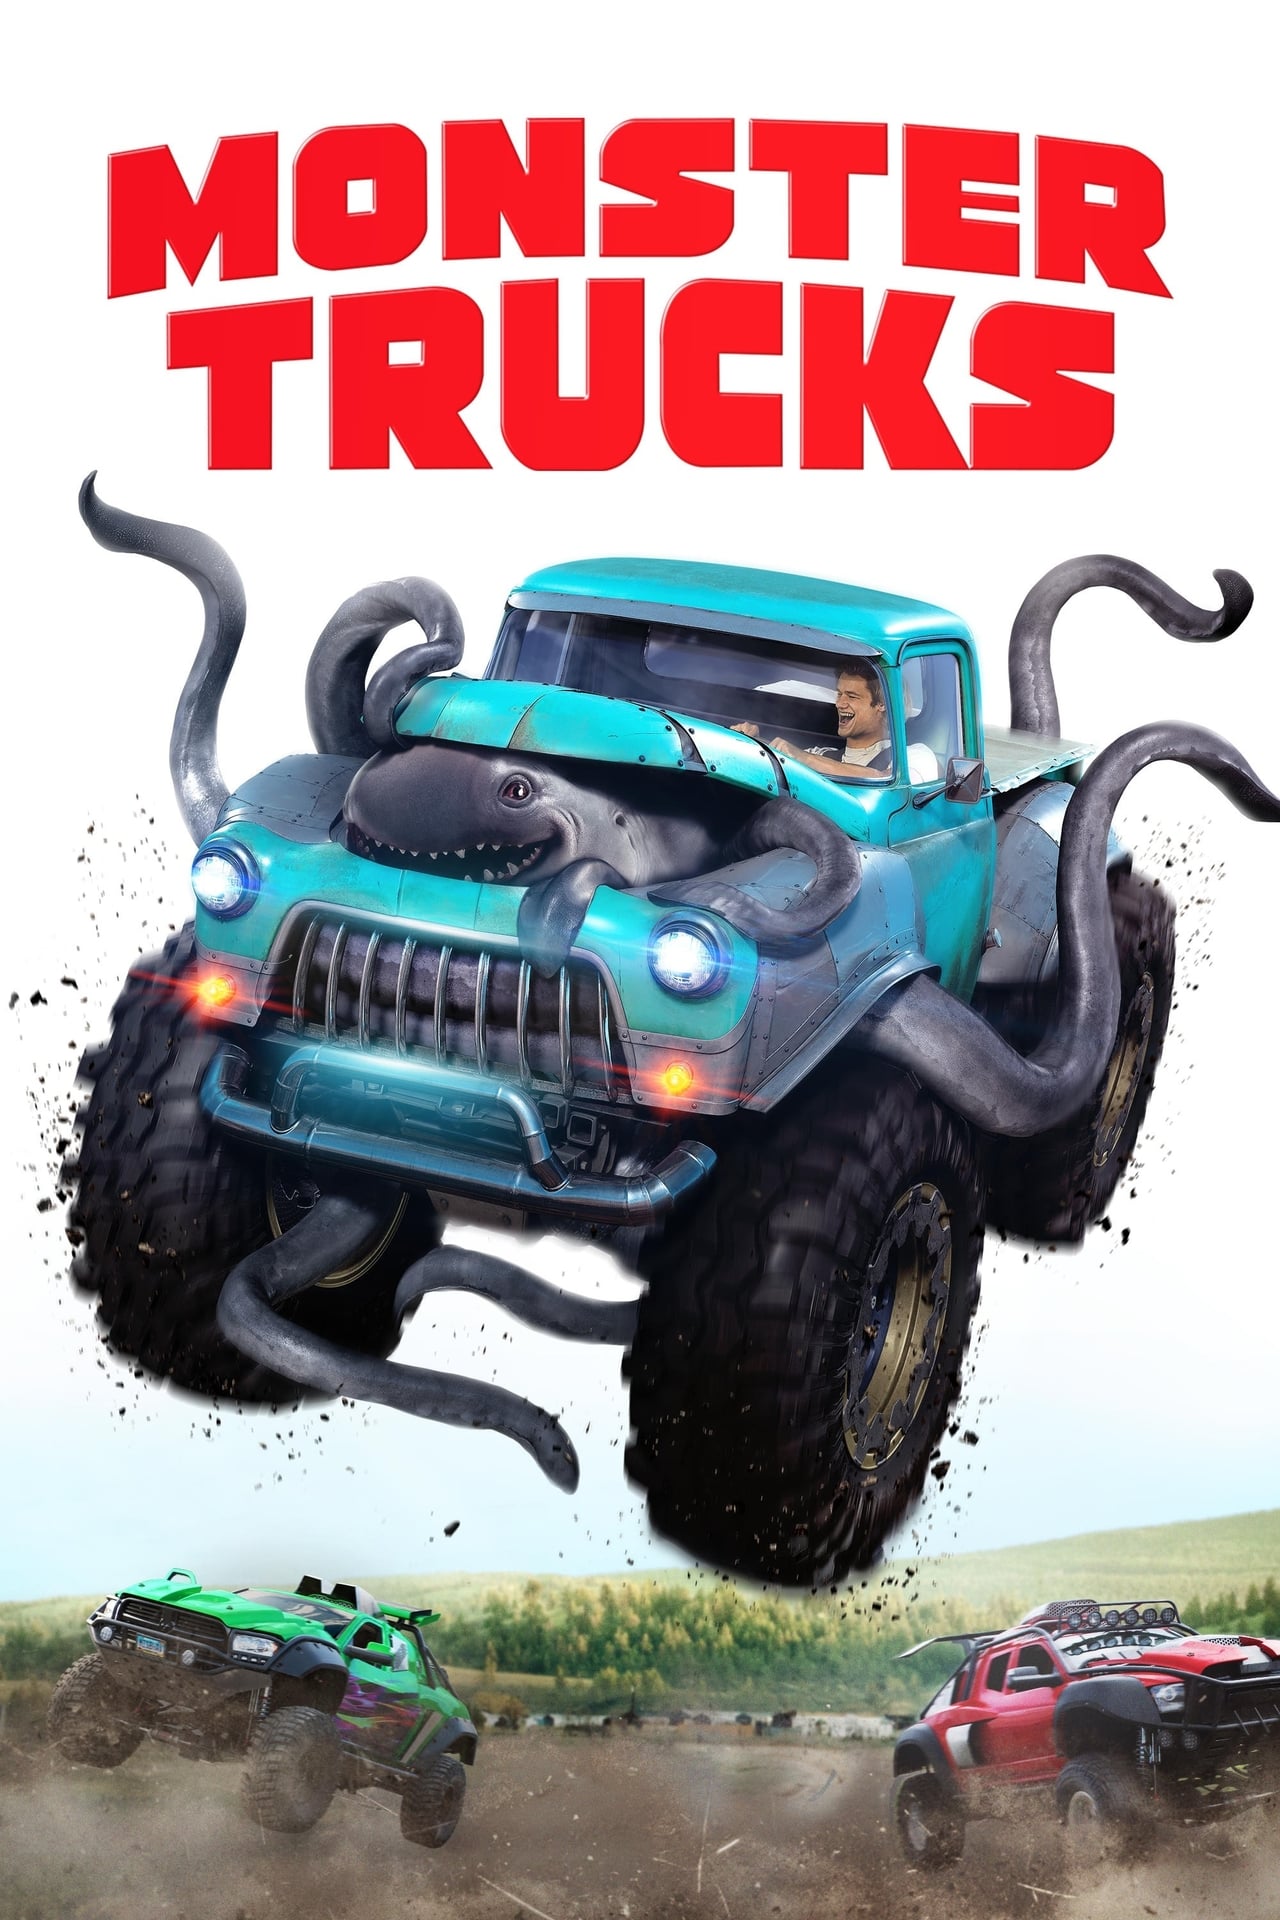 Monster Trucks wiki, synopsis, reviews, watch and download